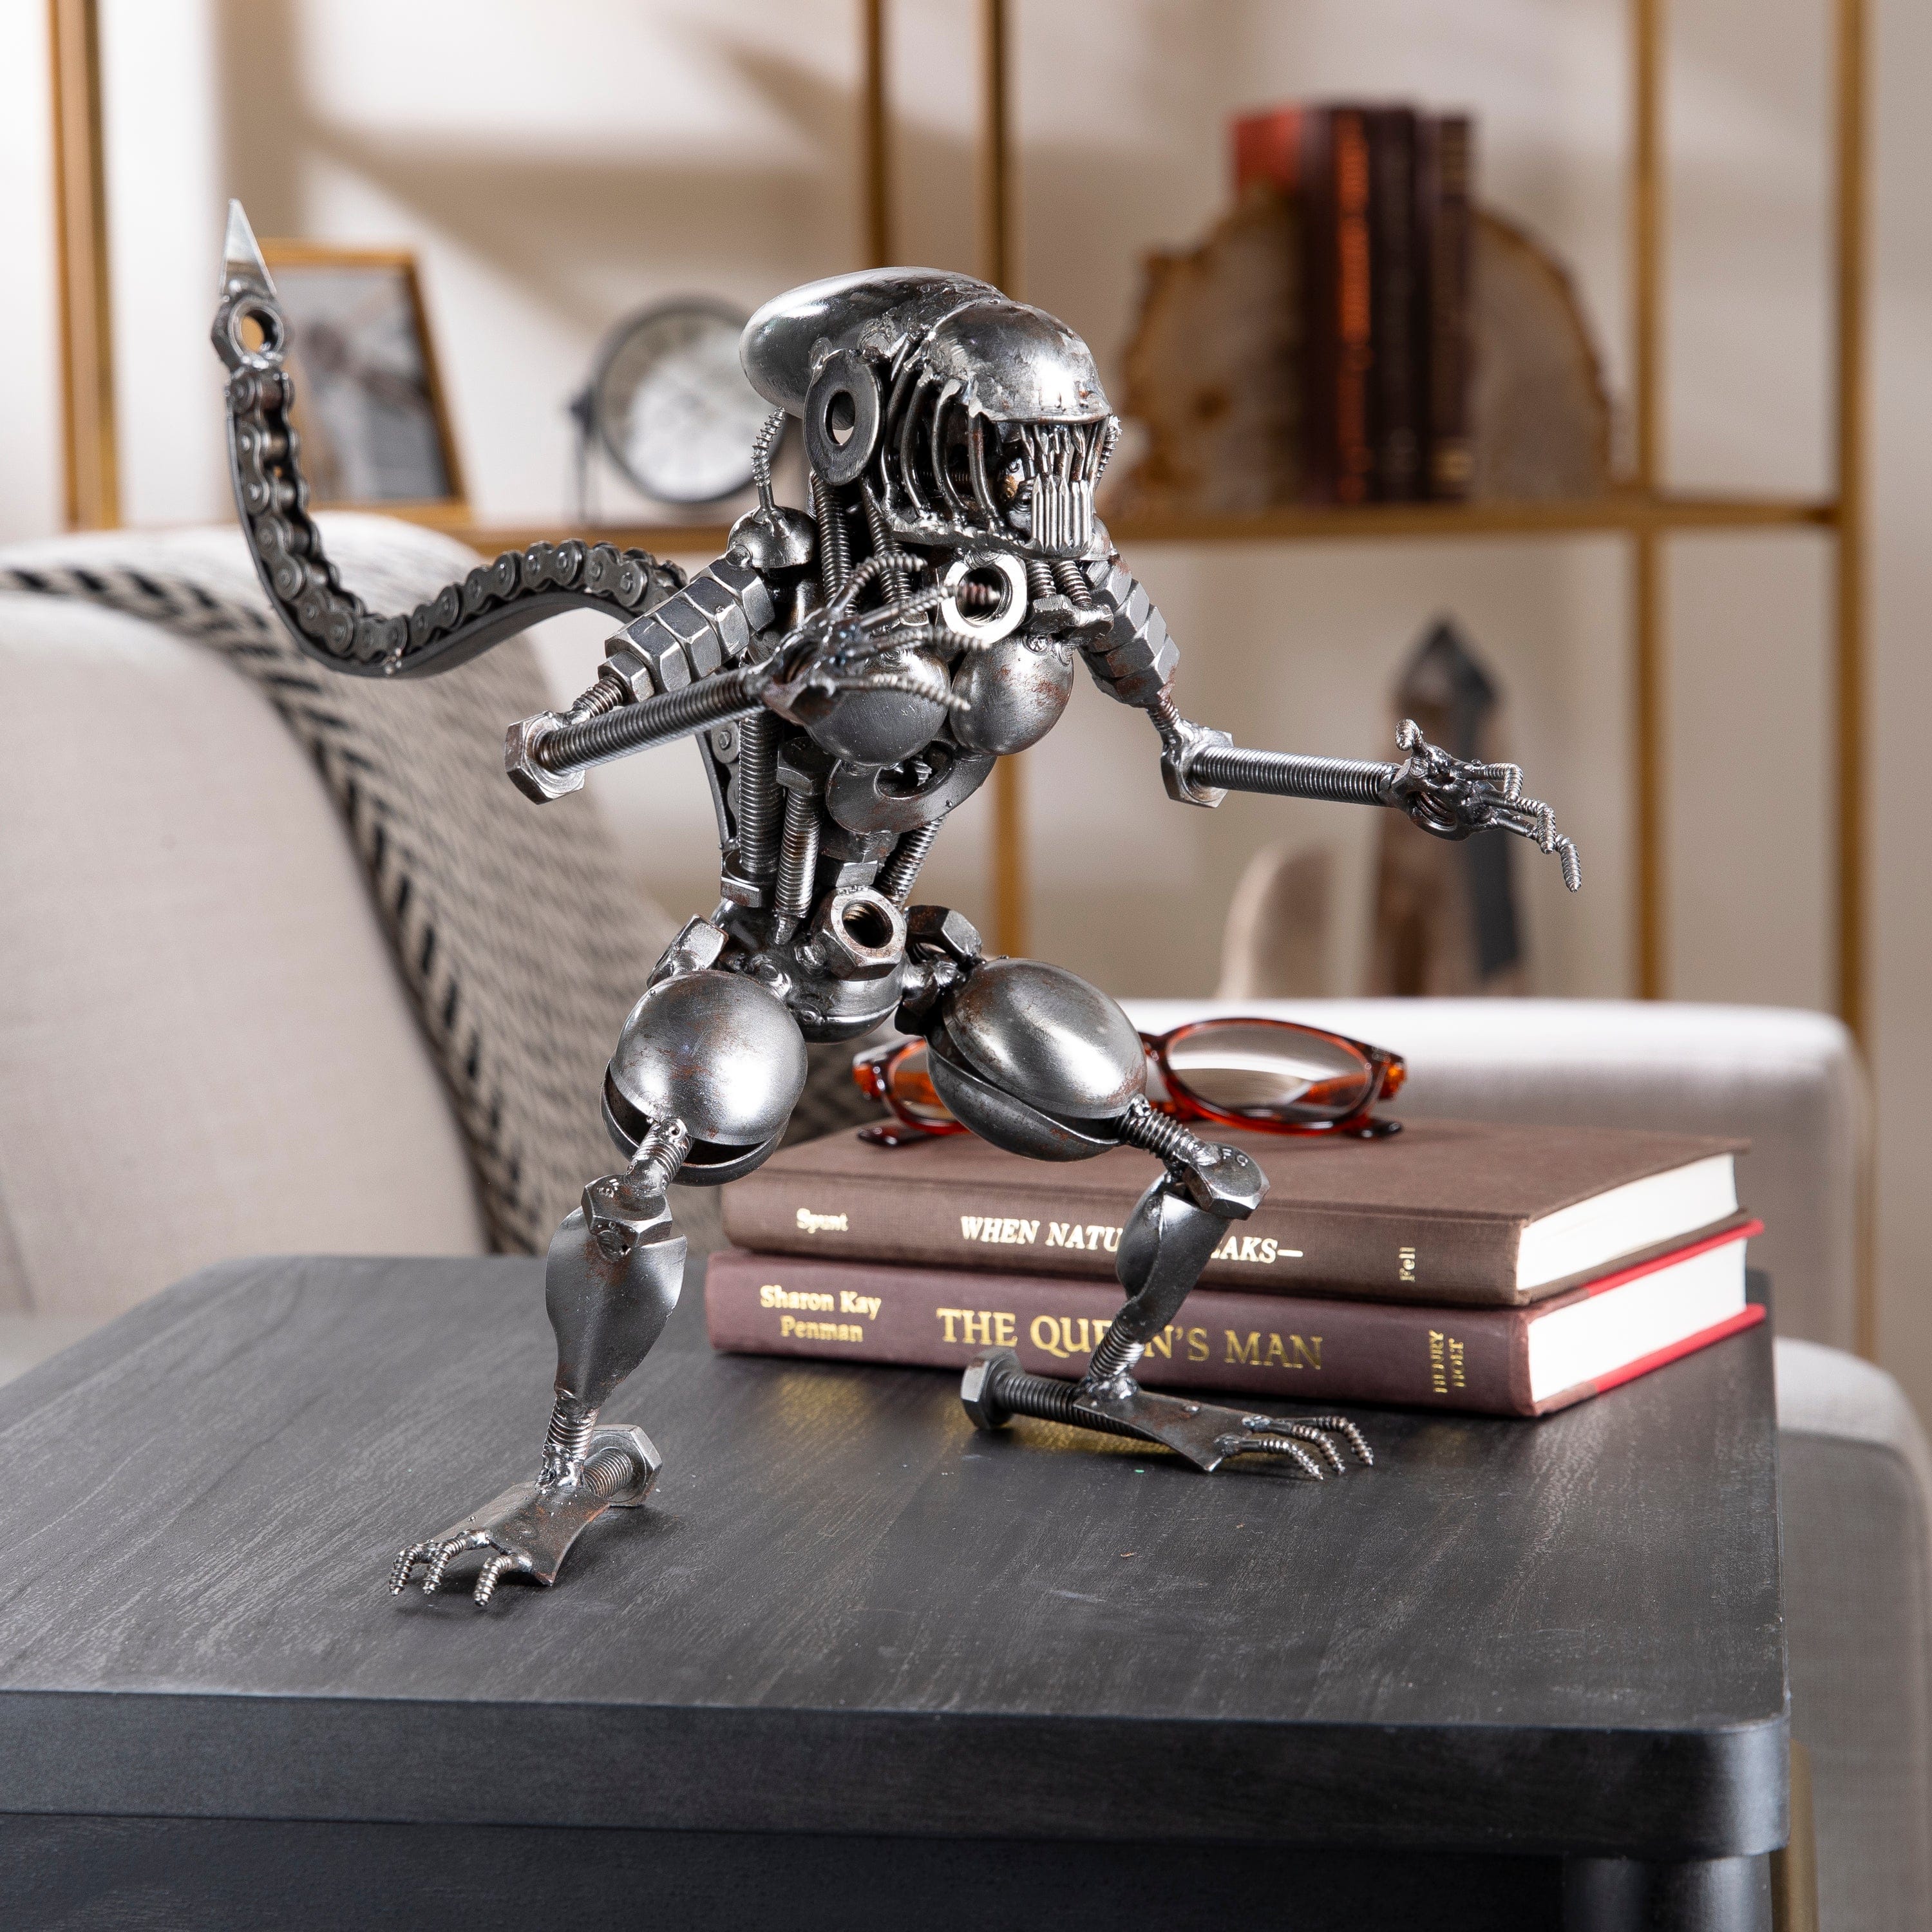 Kalifano Recycled Metal Art Alien Inspired Recycled Metal Sculpture RMS-700AB-N